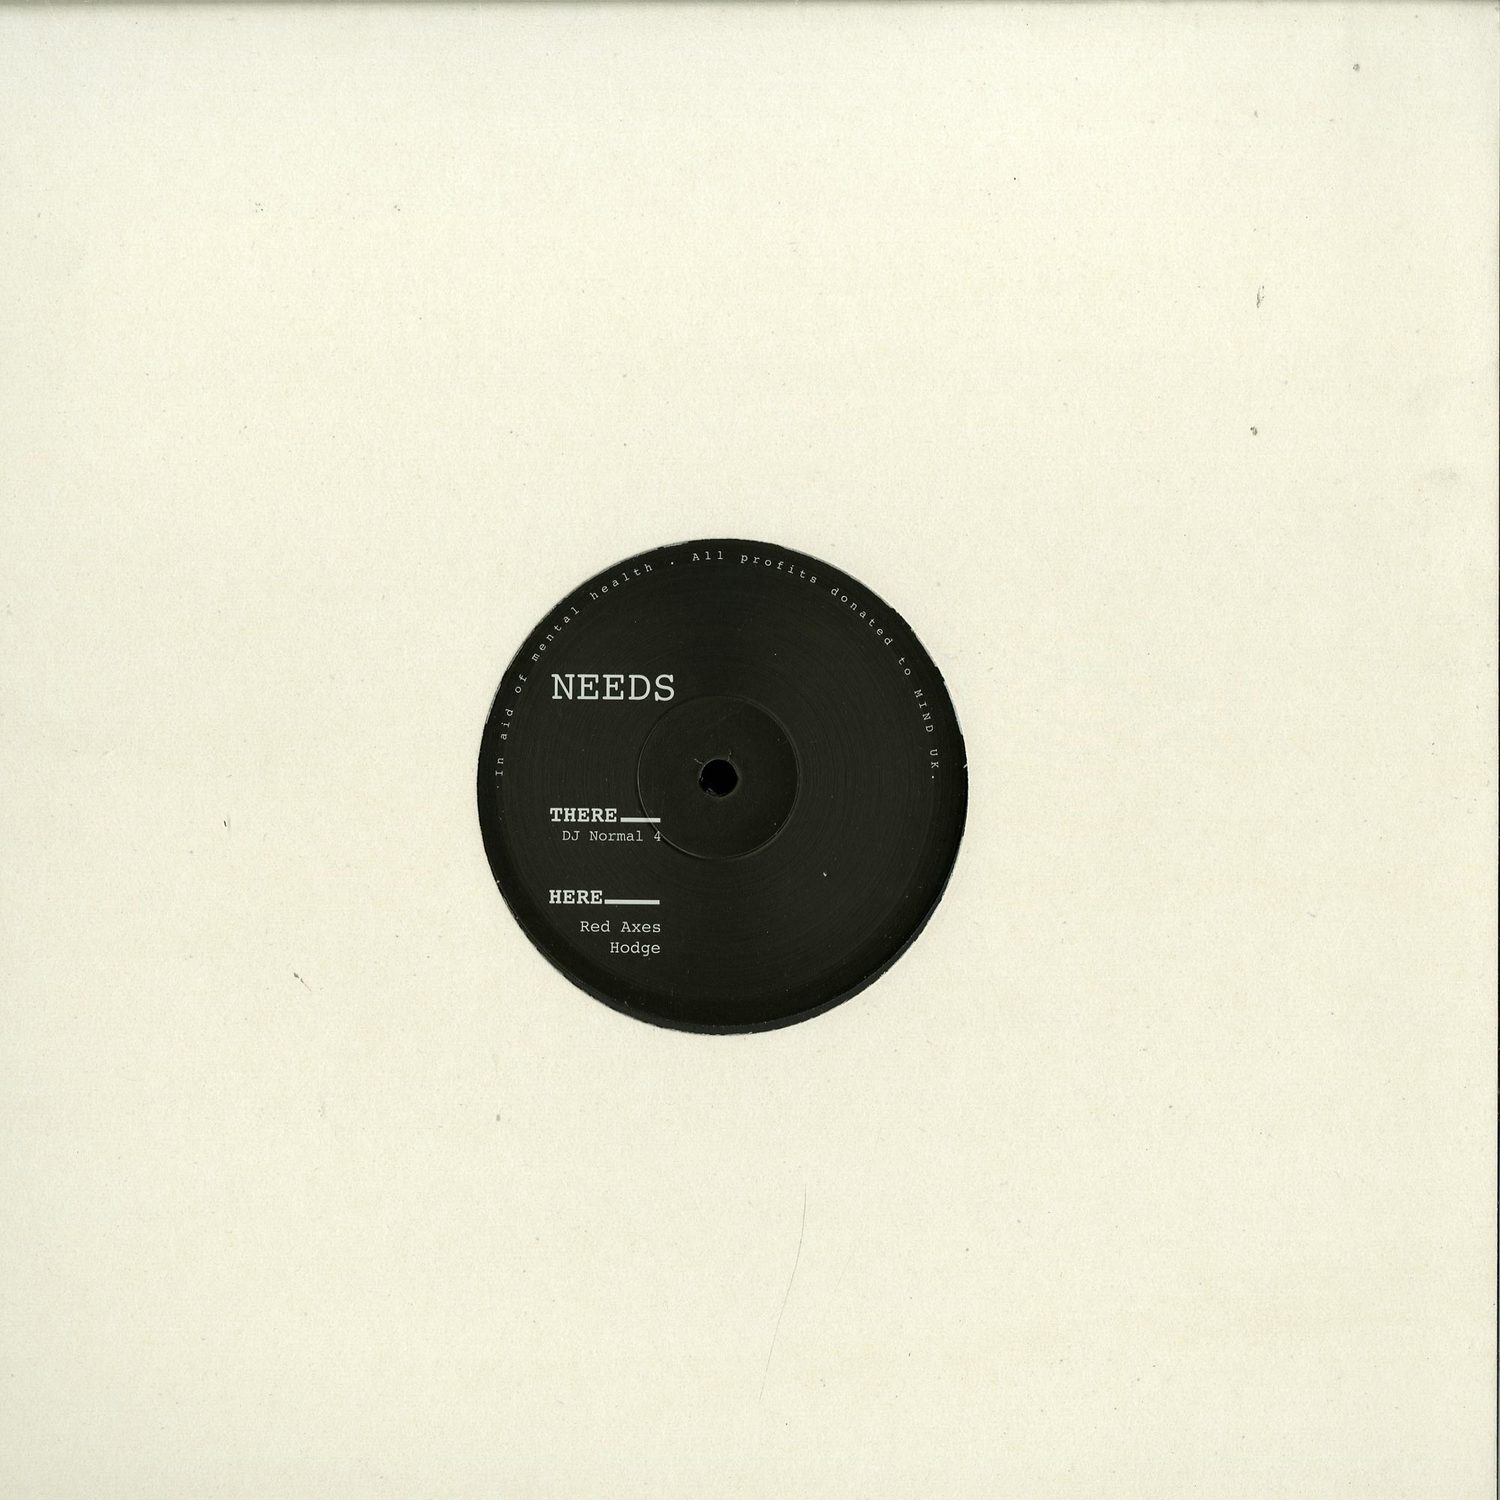 DJ Normal 4 / Red Axes / Hodge - NEEDS 005 